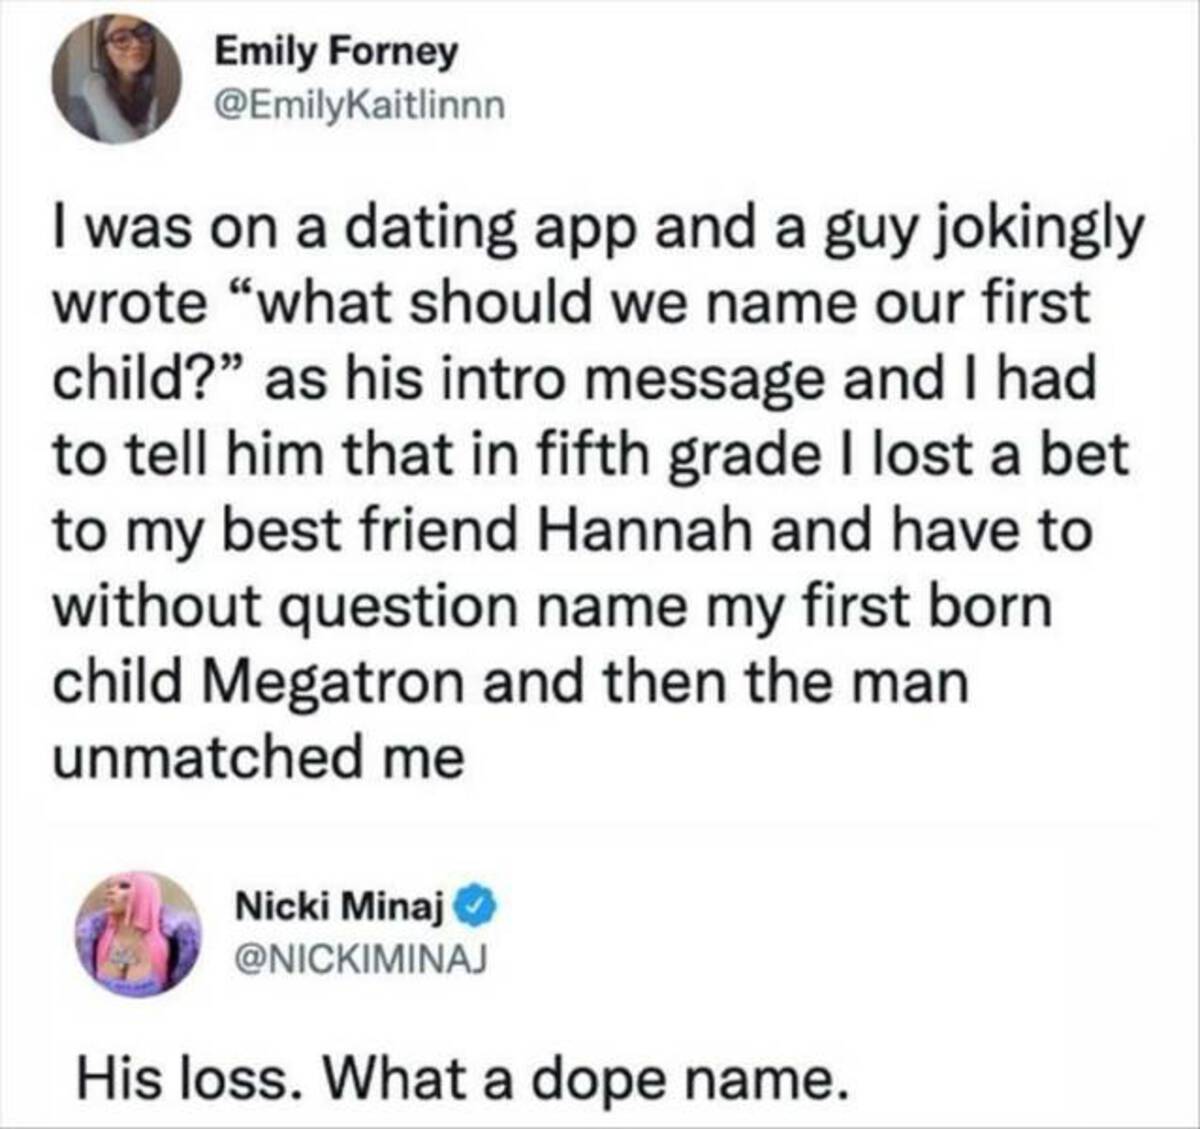 screenshot - Emily Forney I was on a dating app and a guy jokingly wrote "what should we name our first child?" as his intro message and I had to tell him that in fifth grade I lost a bet to my best friend Hannah and have to without question name my first